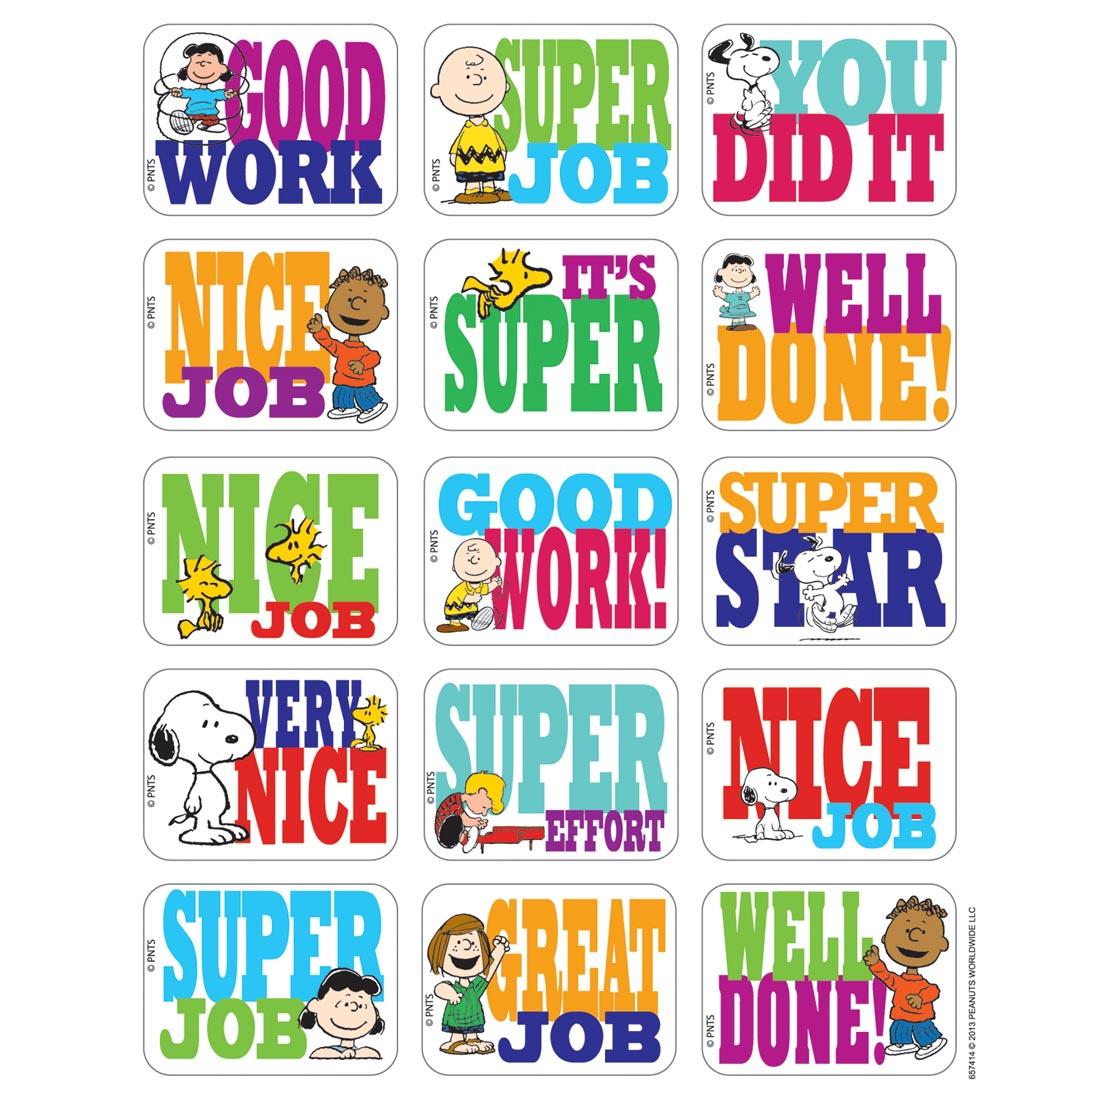 Peanuts Success Stickers by Eureka with messages like Good Work, Super Job, You Did It